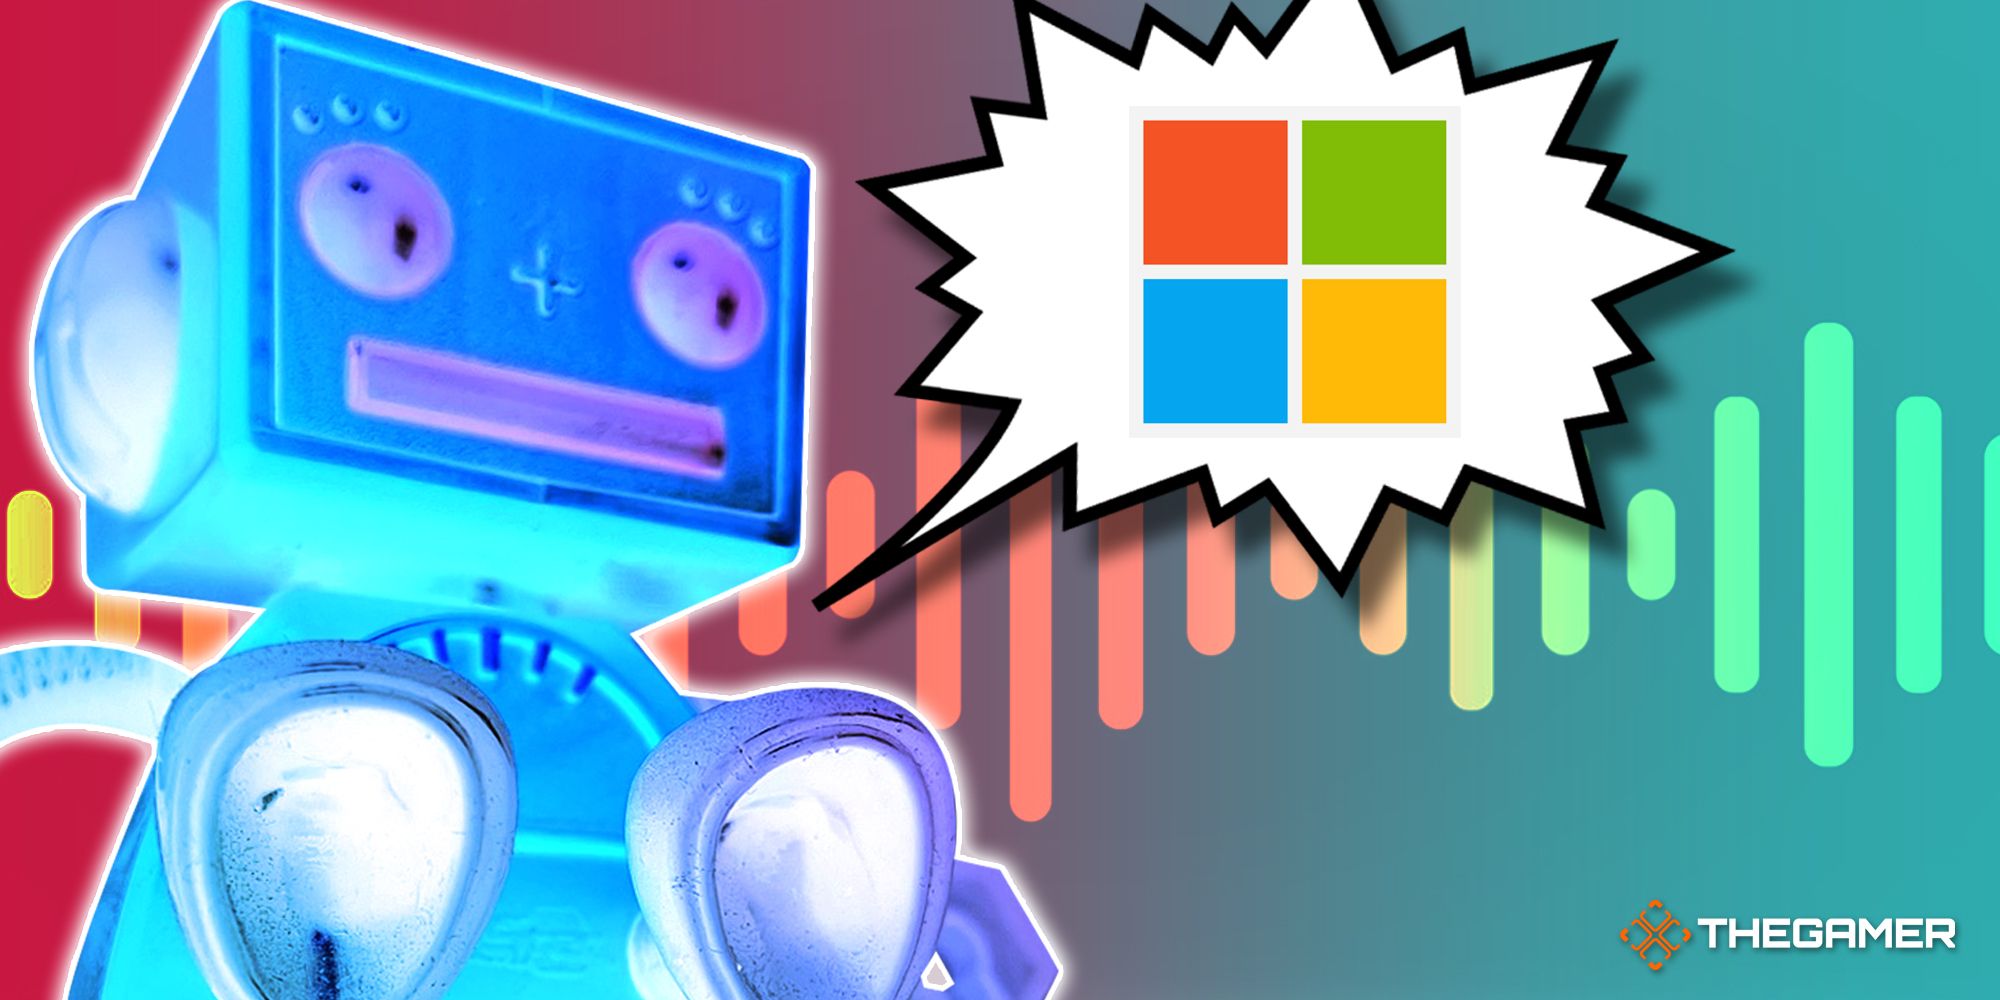 5-Microsoft's New AI Can Imitate Your Voice With Just A 3-Second Sample